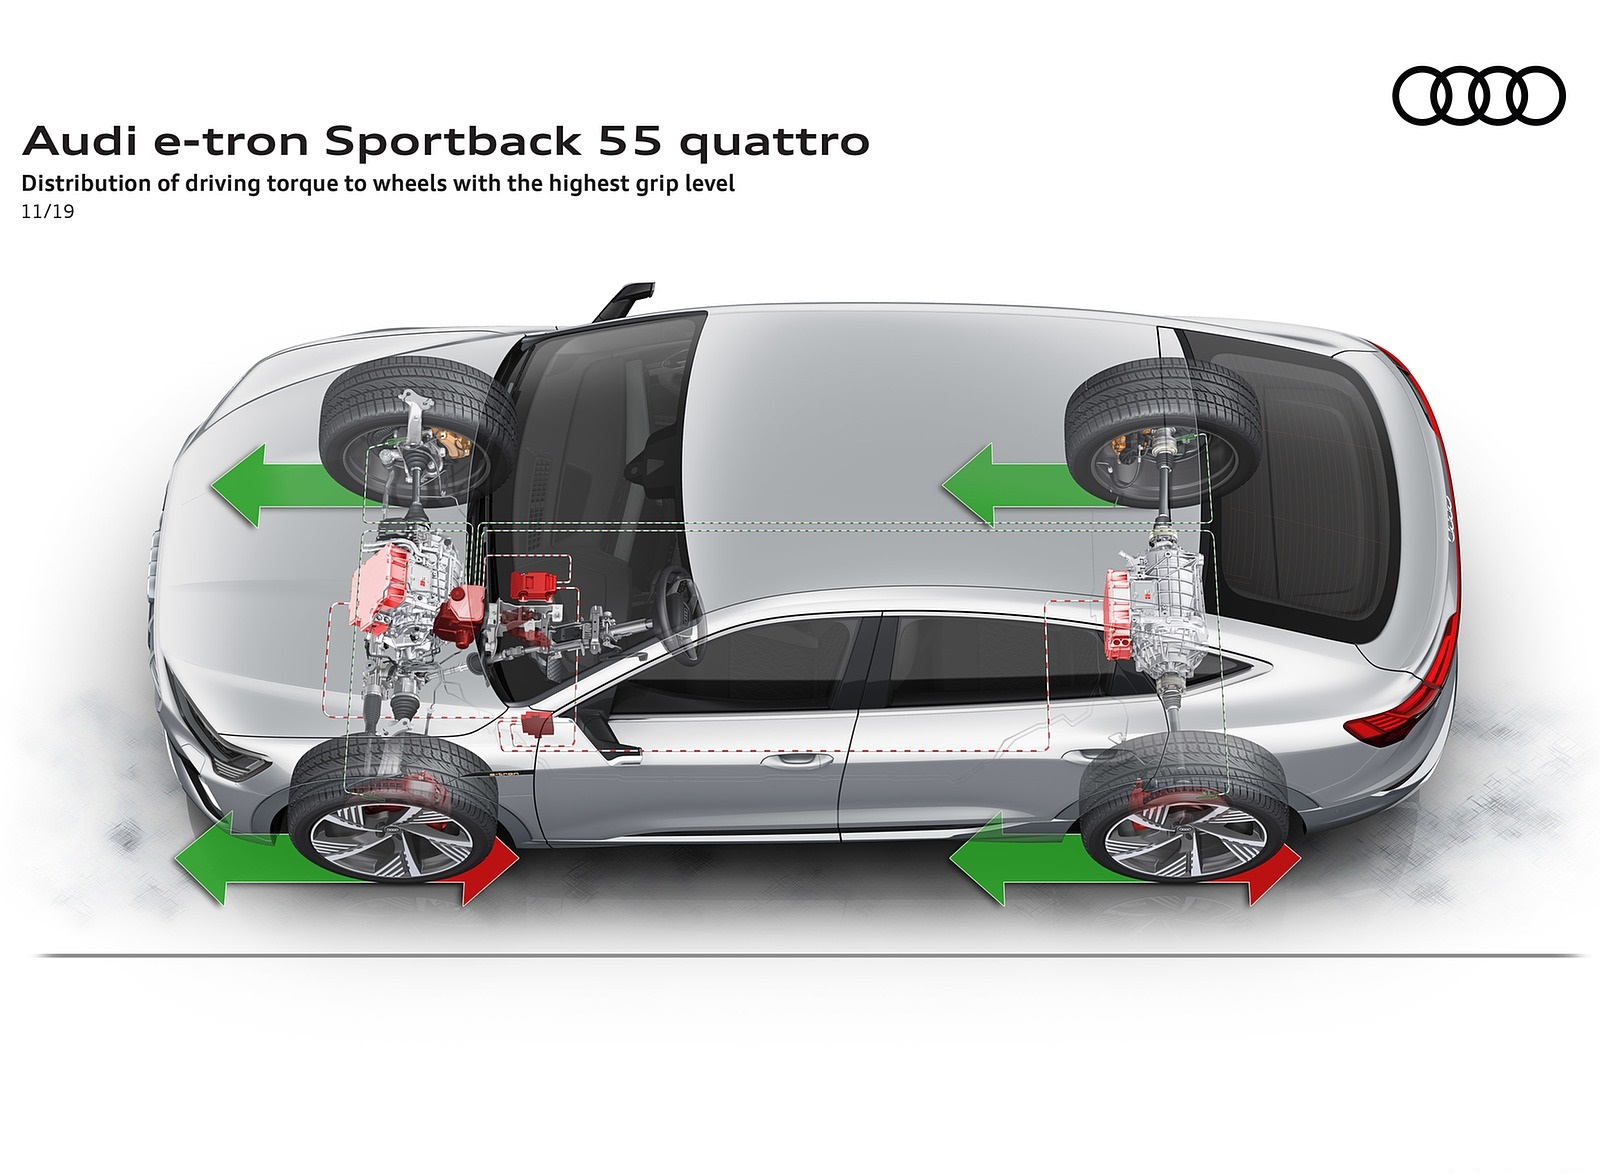 2020 Audi e-tron Sportback Distribution of driving torque to wheels with the highest grip level Wallpapers #111 of 145